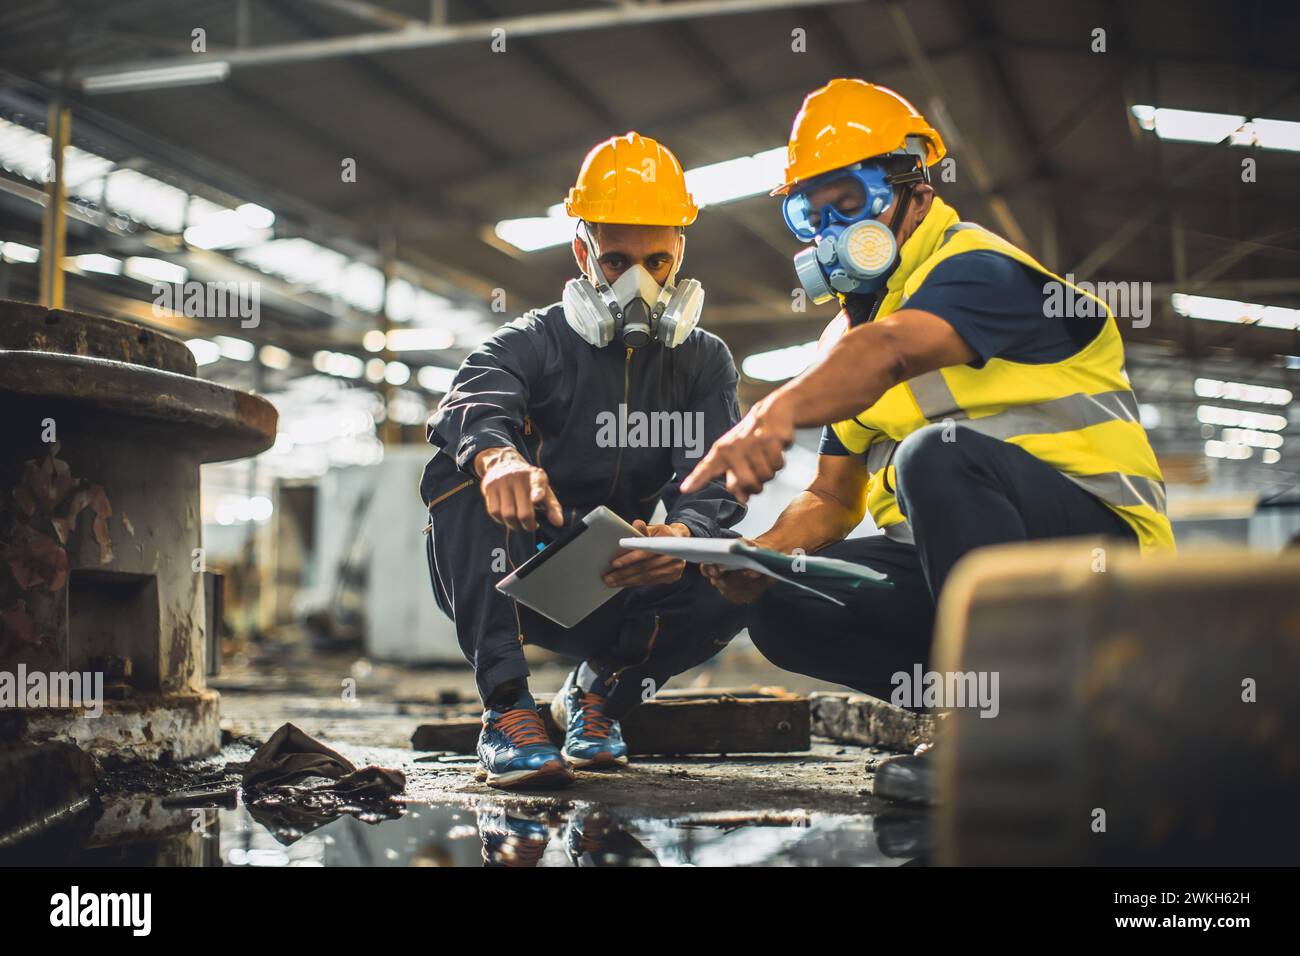 Toxic chemical gas leak safety team working cleaning in danger factory workshop environment contamination safety and protection Stock Photo